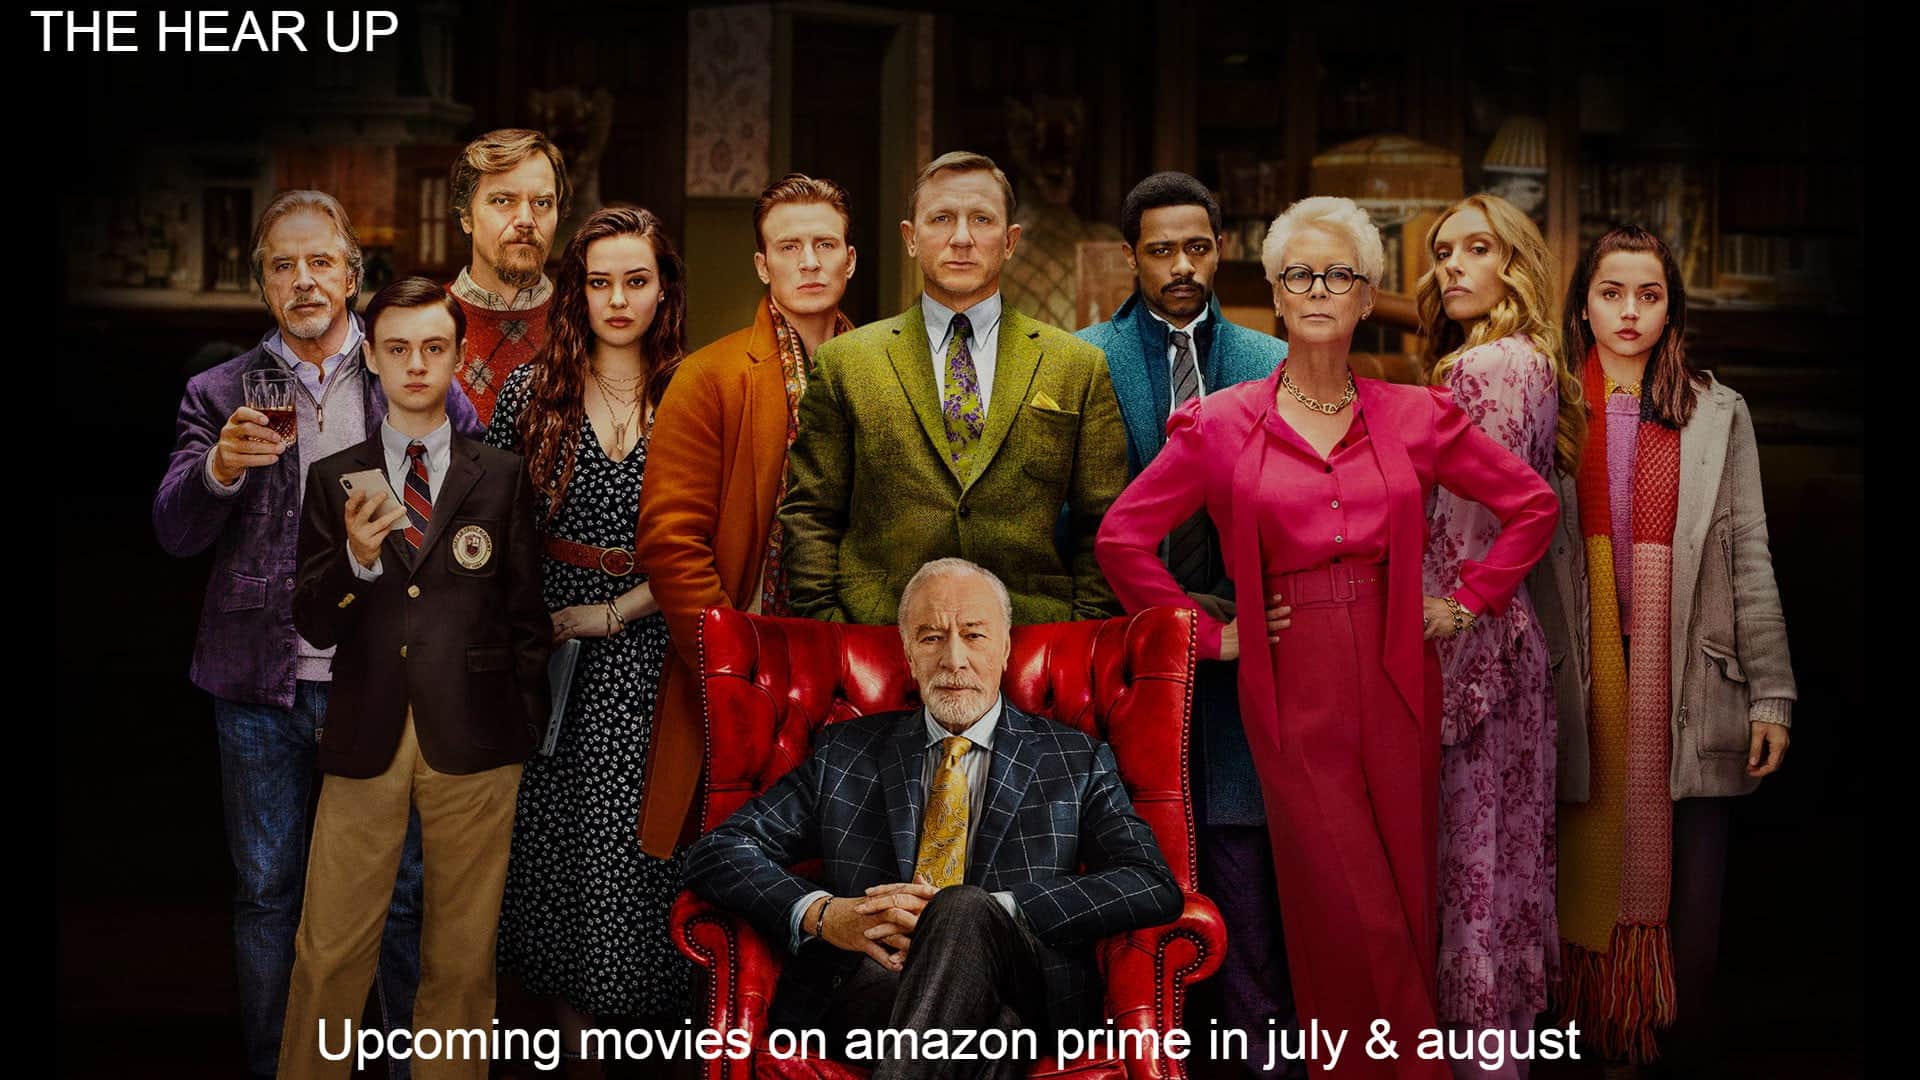 Upcoming movies on amazon prime in july & august